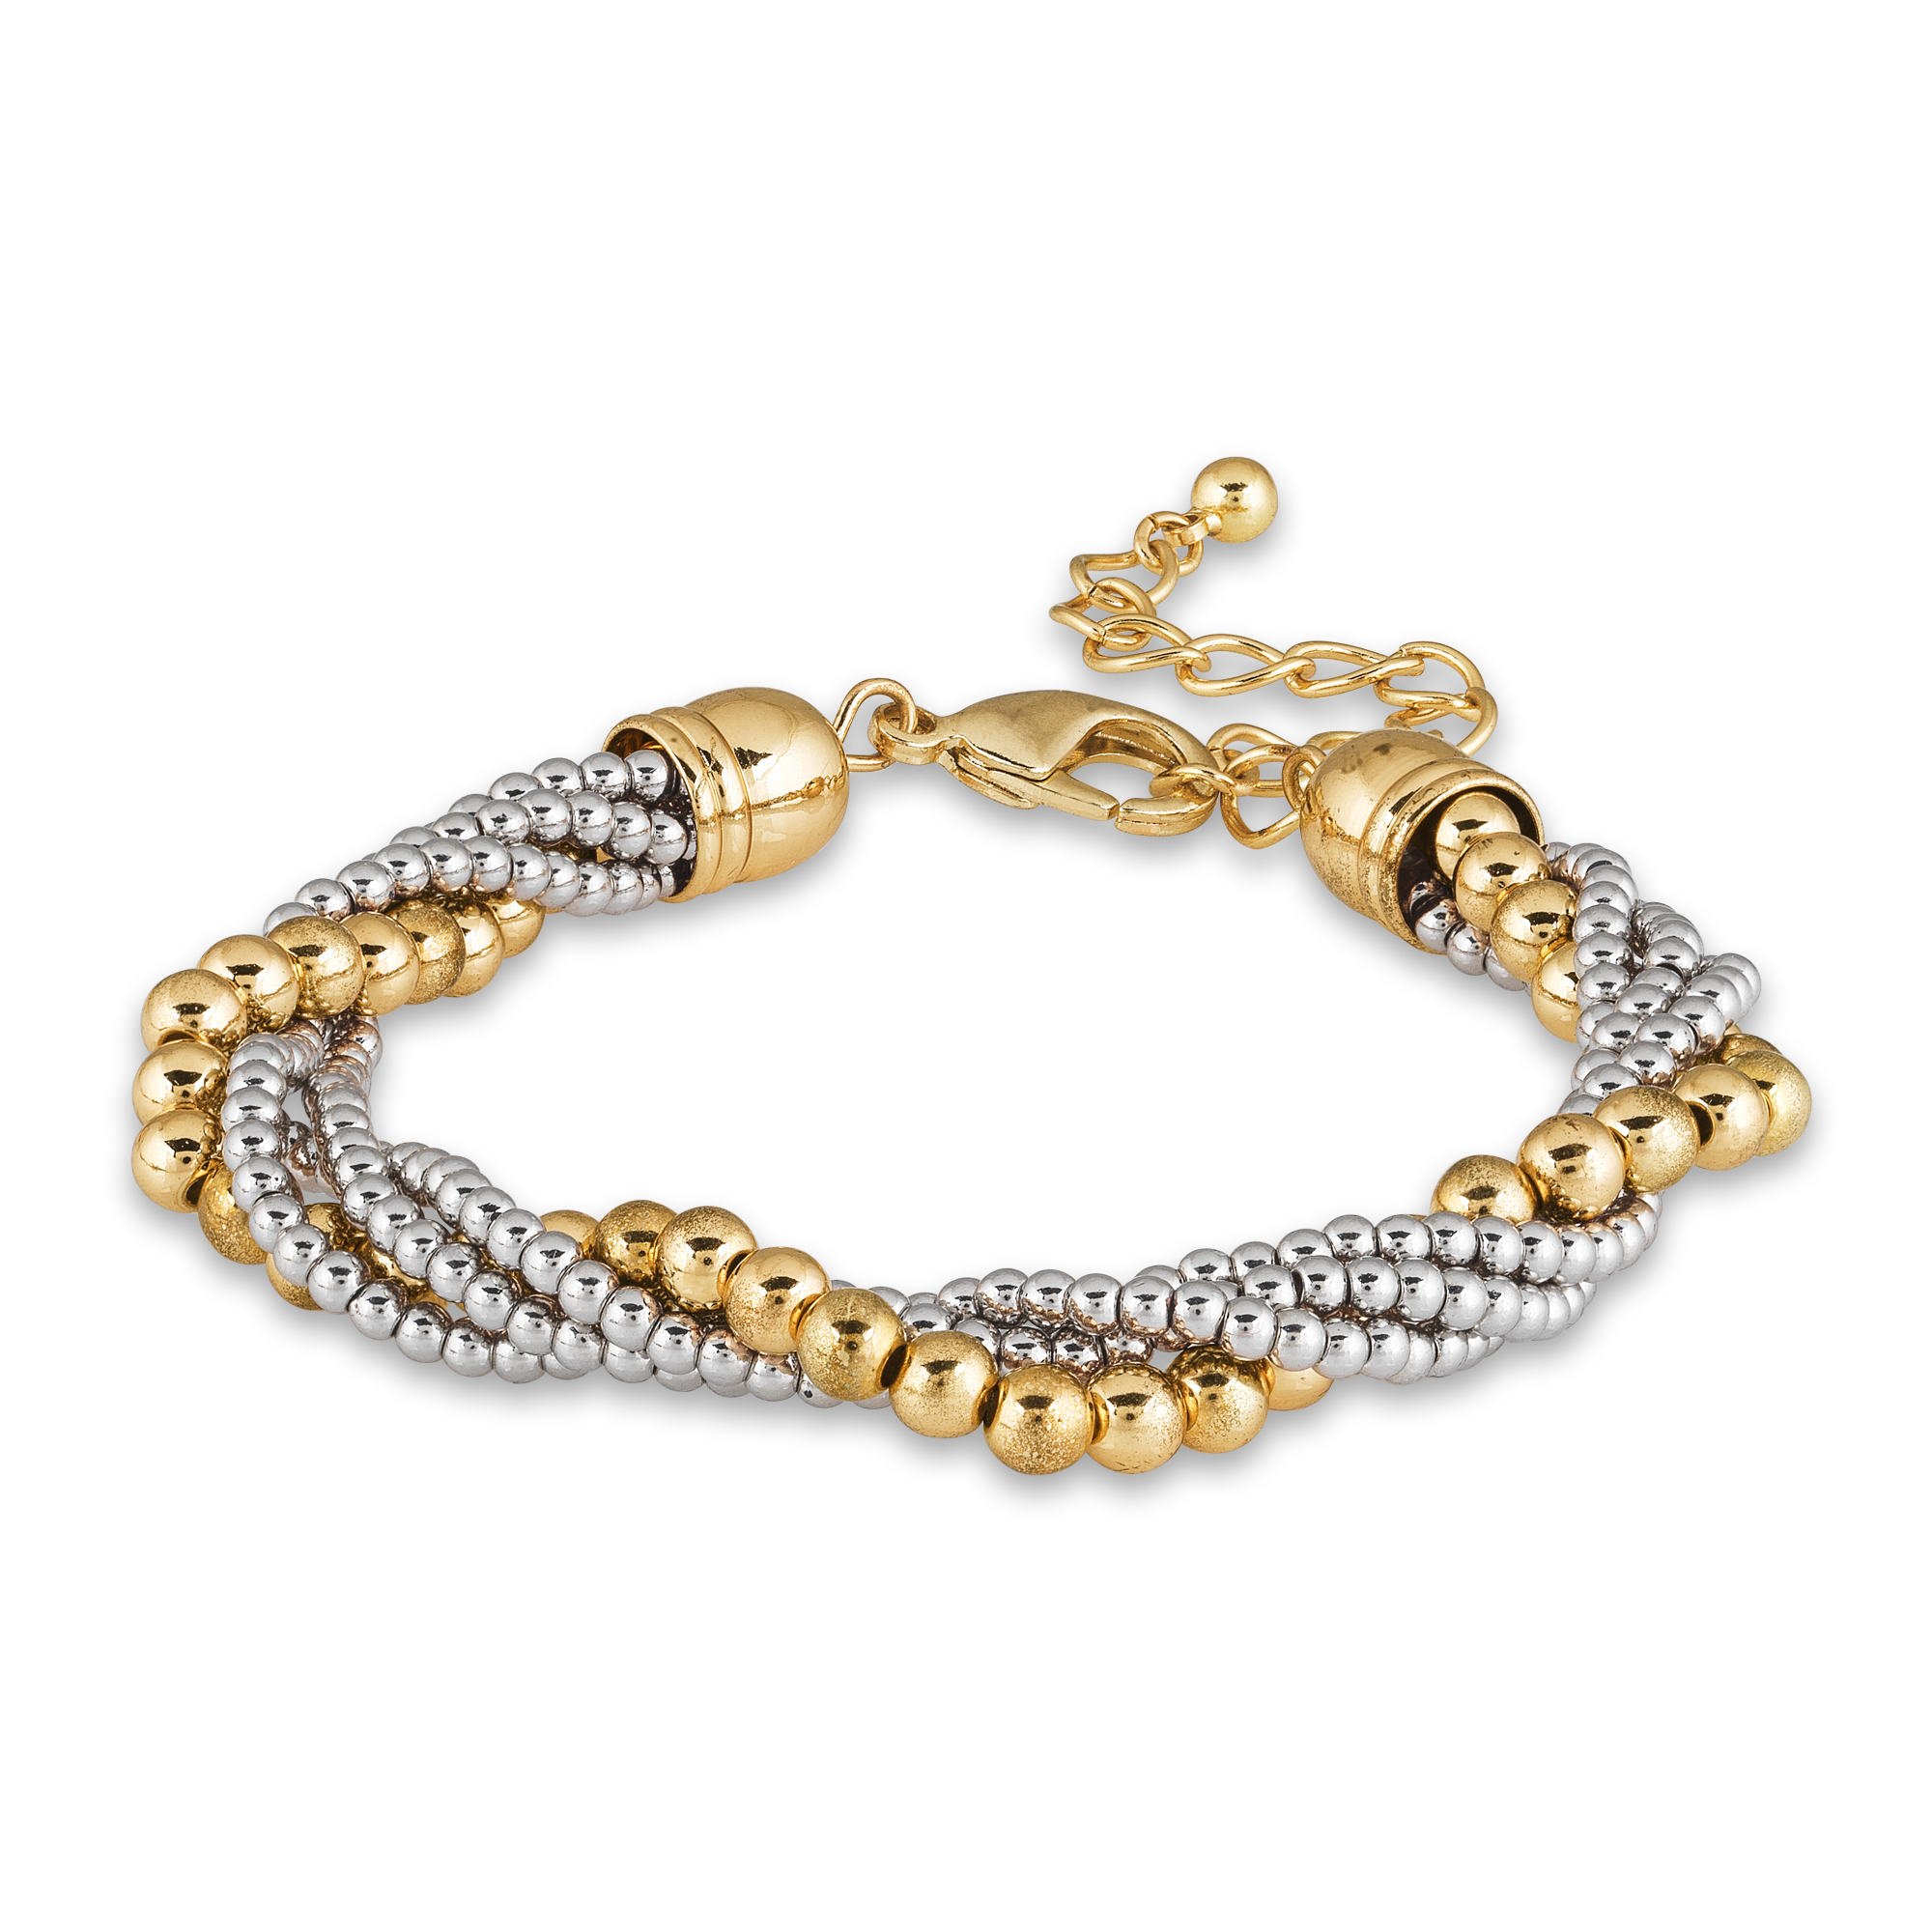 Two Tone Chic Bracelet Collection 10834 0019 a main